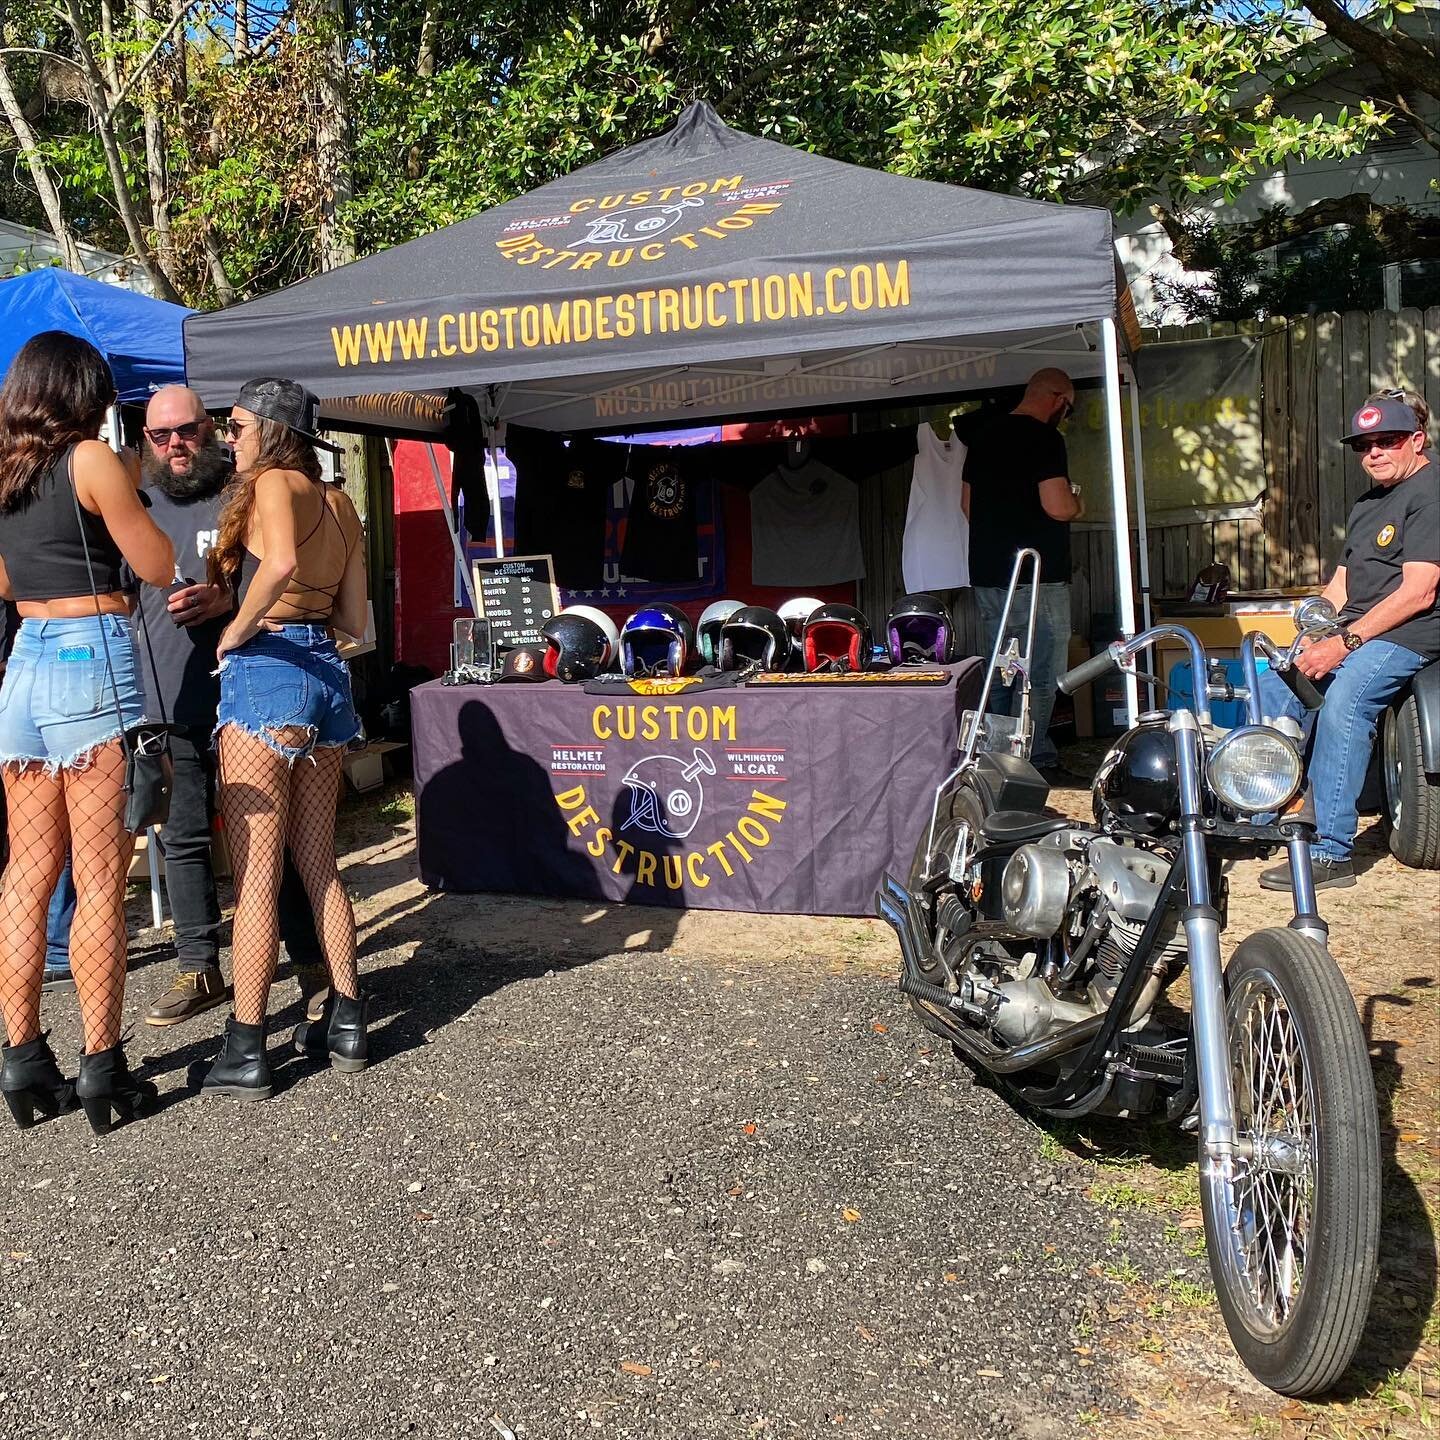 We will be set up at @willieschoppertime on Thursday. Swing through and pick up a t-shirt, helmet, say hey, whatever! See y&rsquo;all this week. Rally!!!! #motorcyclegloves #cyclesourcemagazine #motoculture #makebikersbuffagain #Harley #bobber #chopp